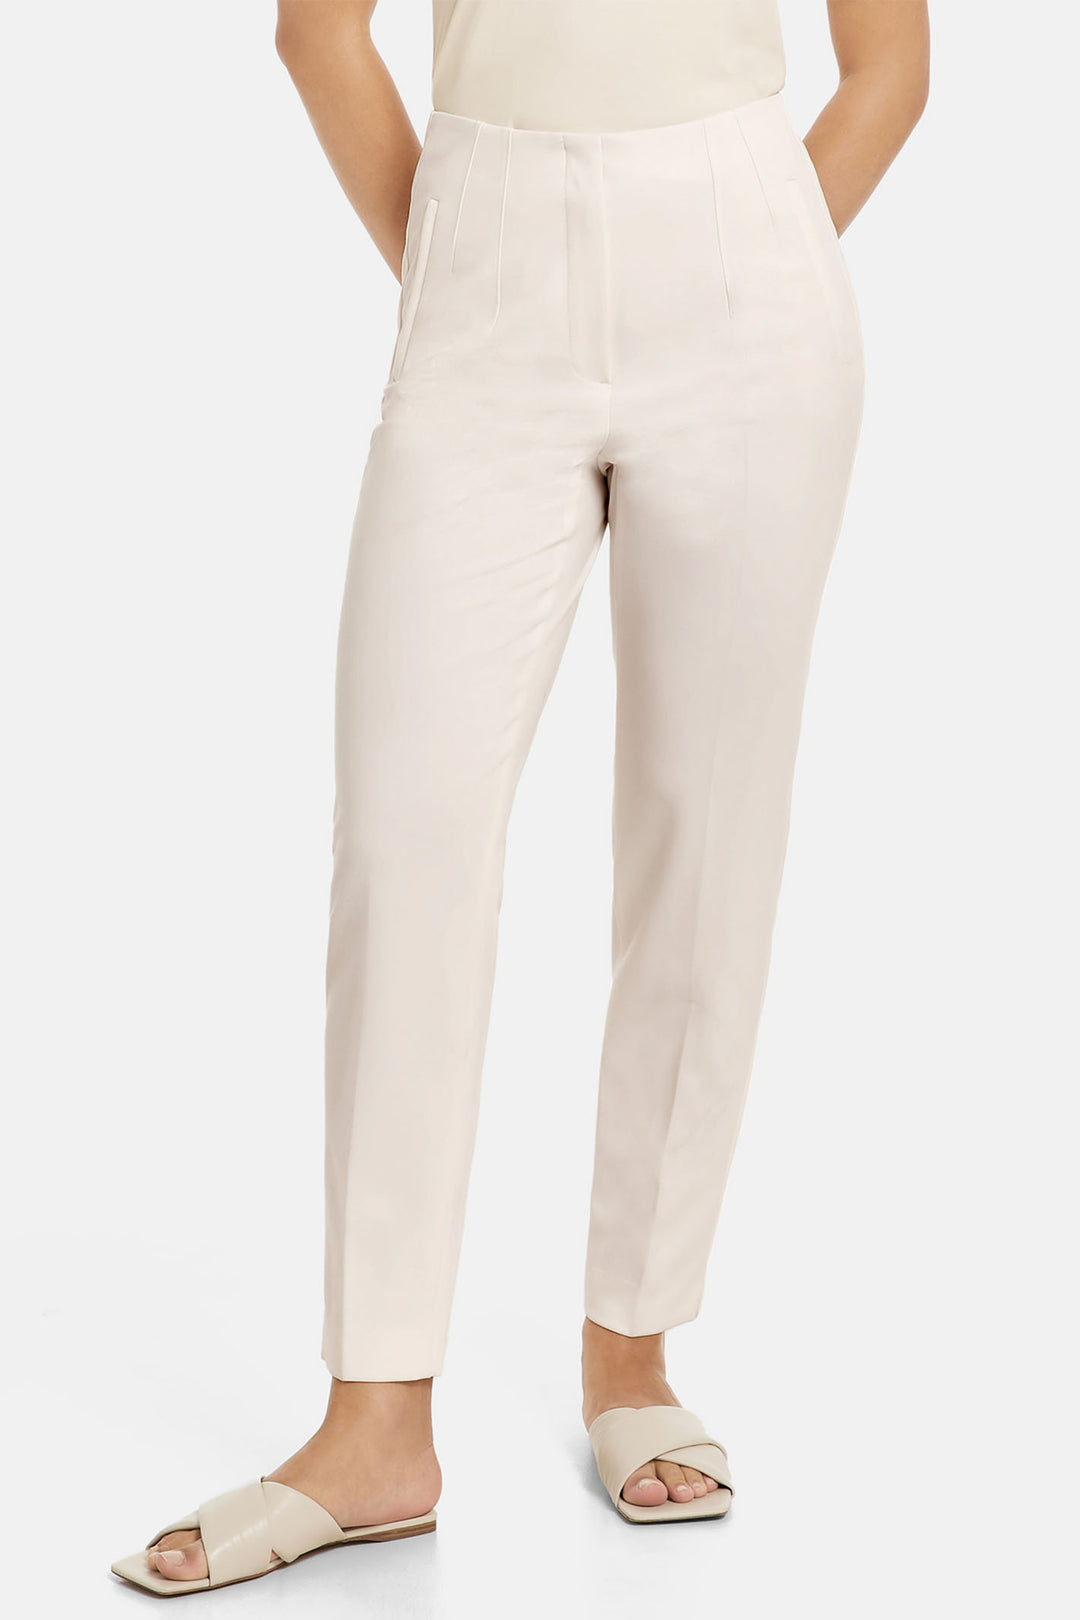 Gerry Weber 320014 Whisper White Straight Leg Trousers - Experience Boutique